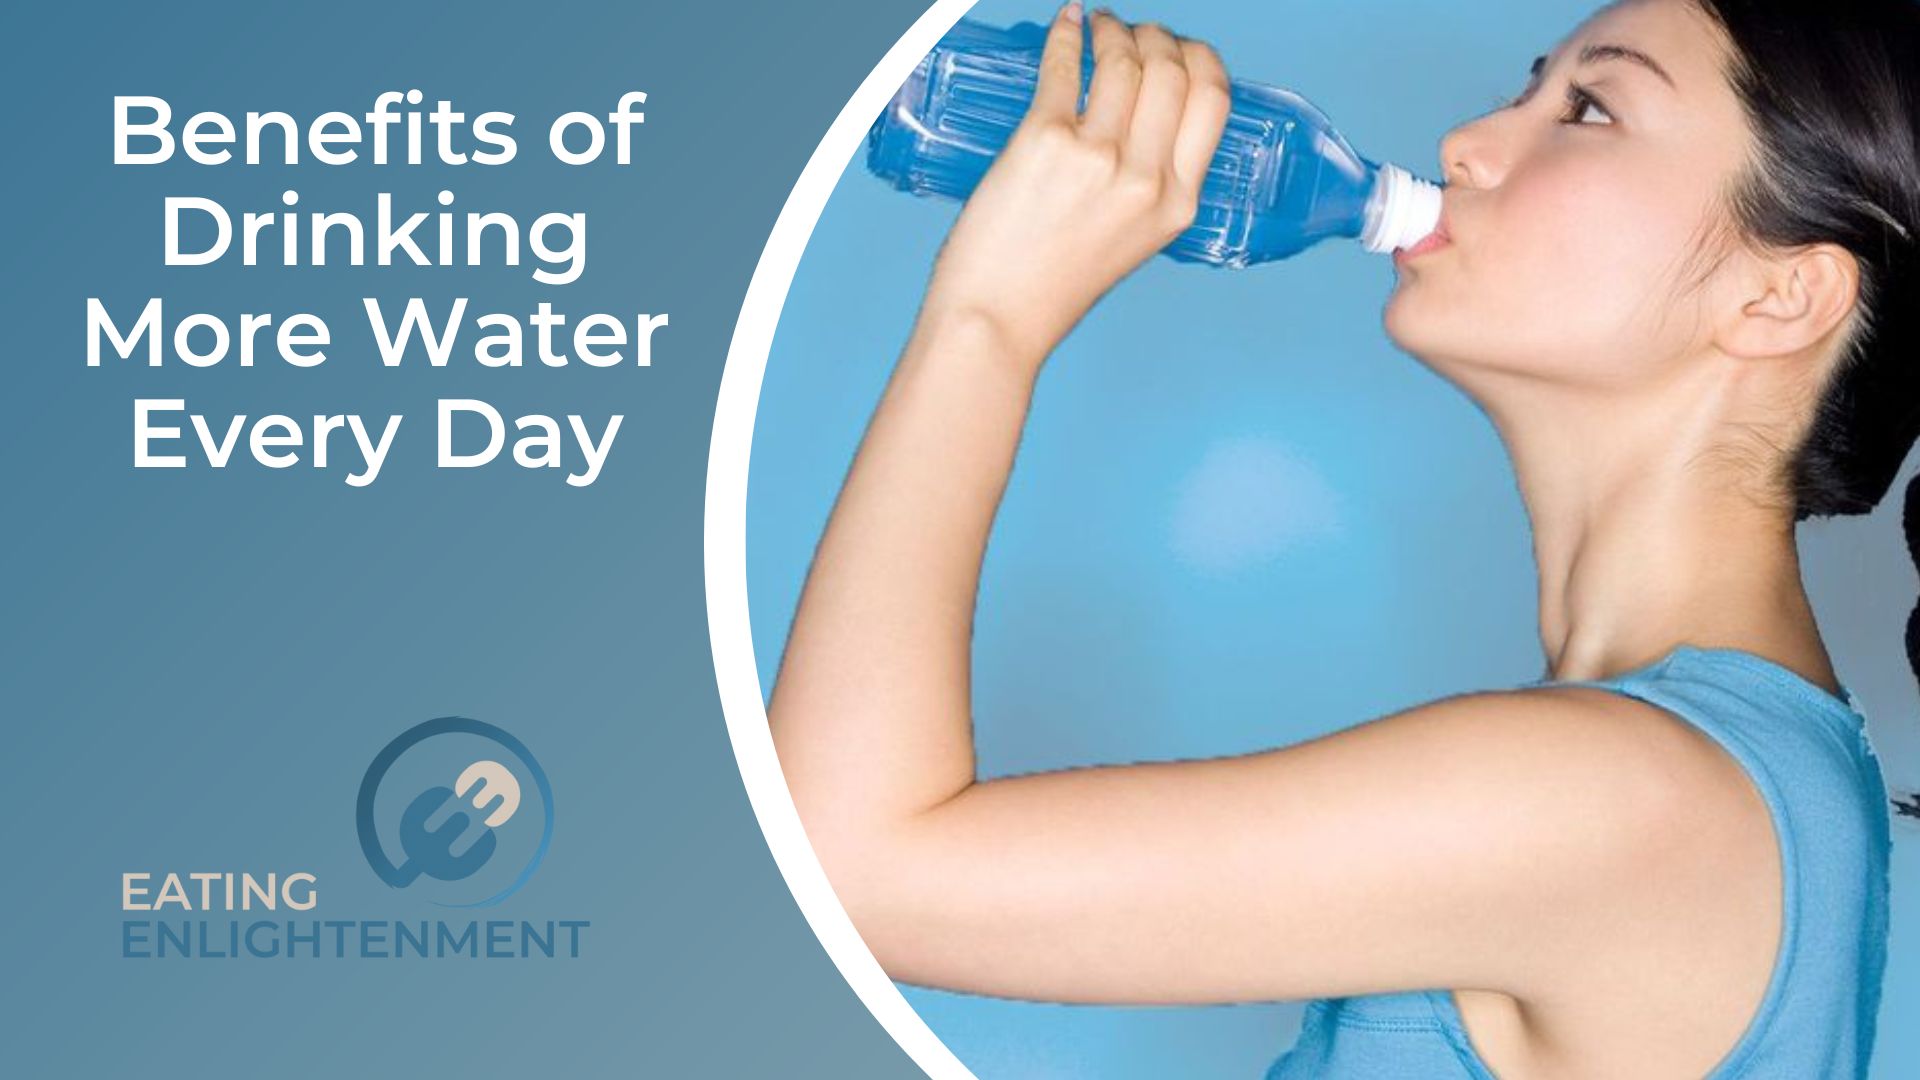 Benefits of Drinking More Water Every Day